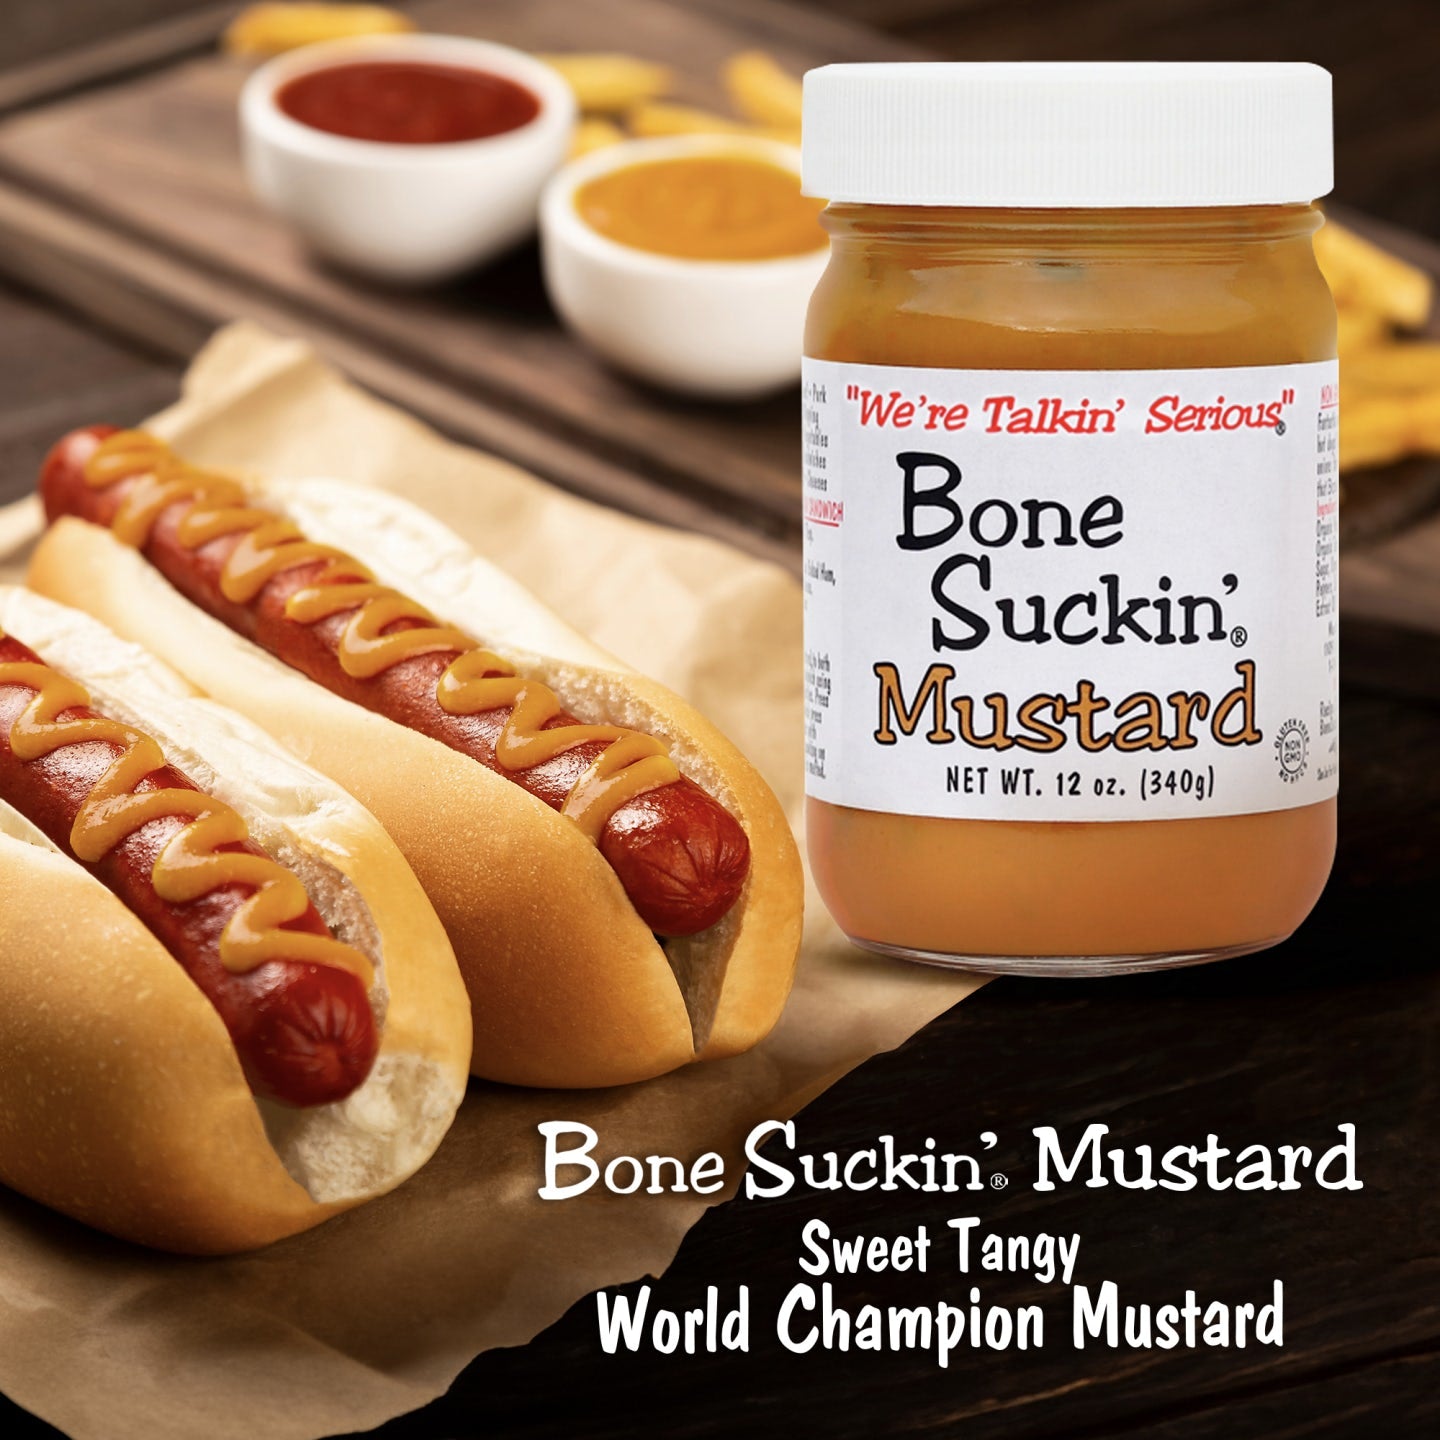 Bone Suckin' Mustard, 12 oz in Glass Bottle - Gourmet Mustard, Sweet & Tangy With Creamy Texture, Gluten-Free, Non-GMO, No HFCS, Kosher, Perfect for Hot Dogs, Brats, Sandwiches, Cheese, Seafood, 1 Bottle